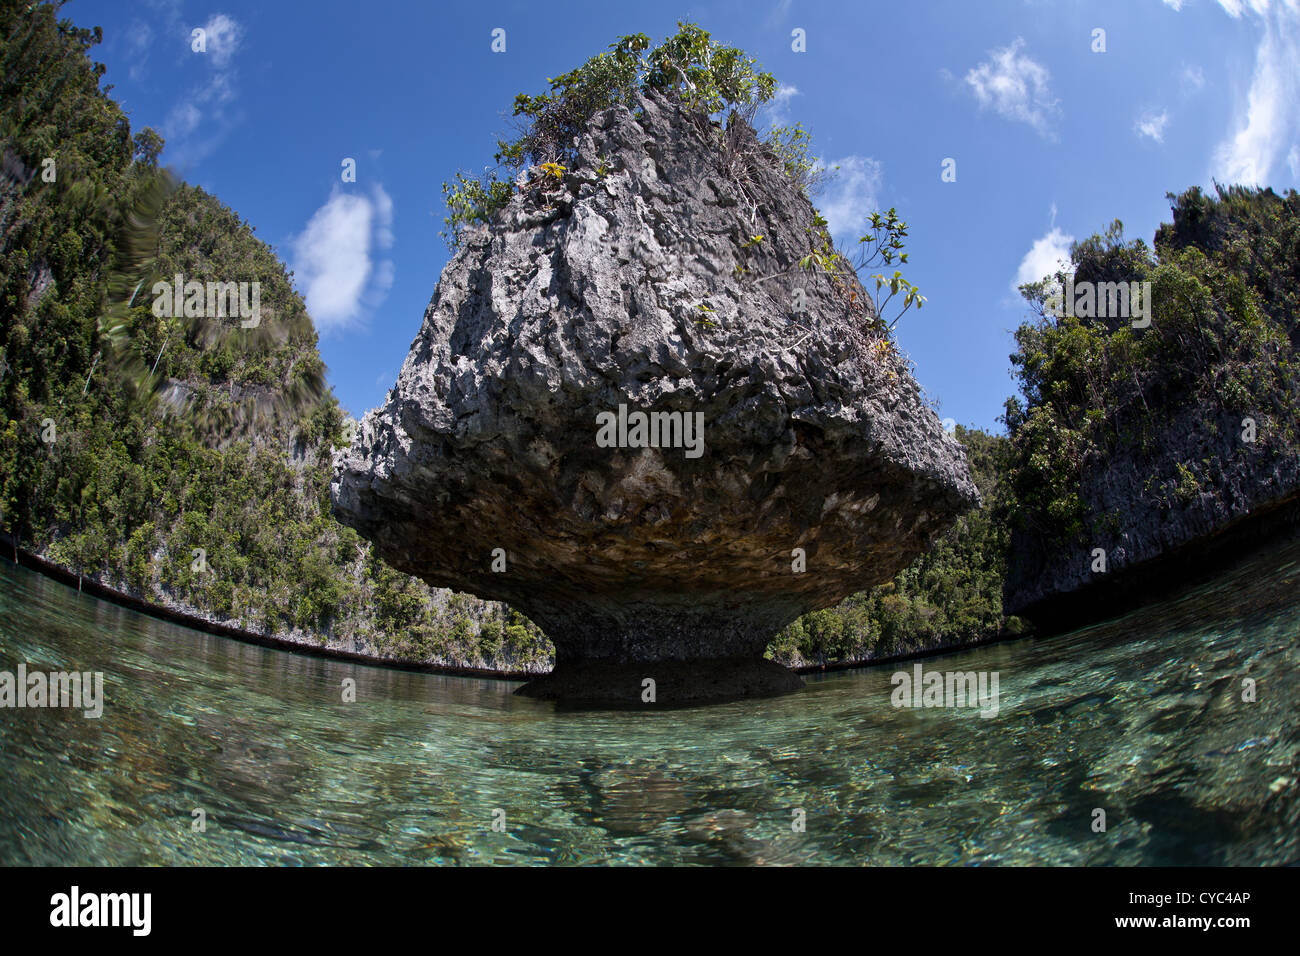 A small mushroom-shaped limestone island shows it has been heavily eroded by biological, physical, and chemical forces. Stock Photo